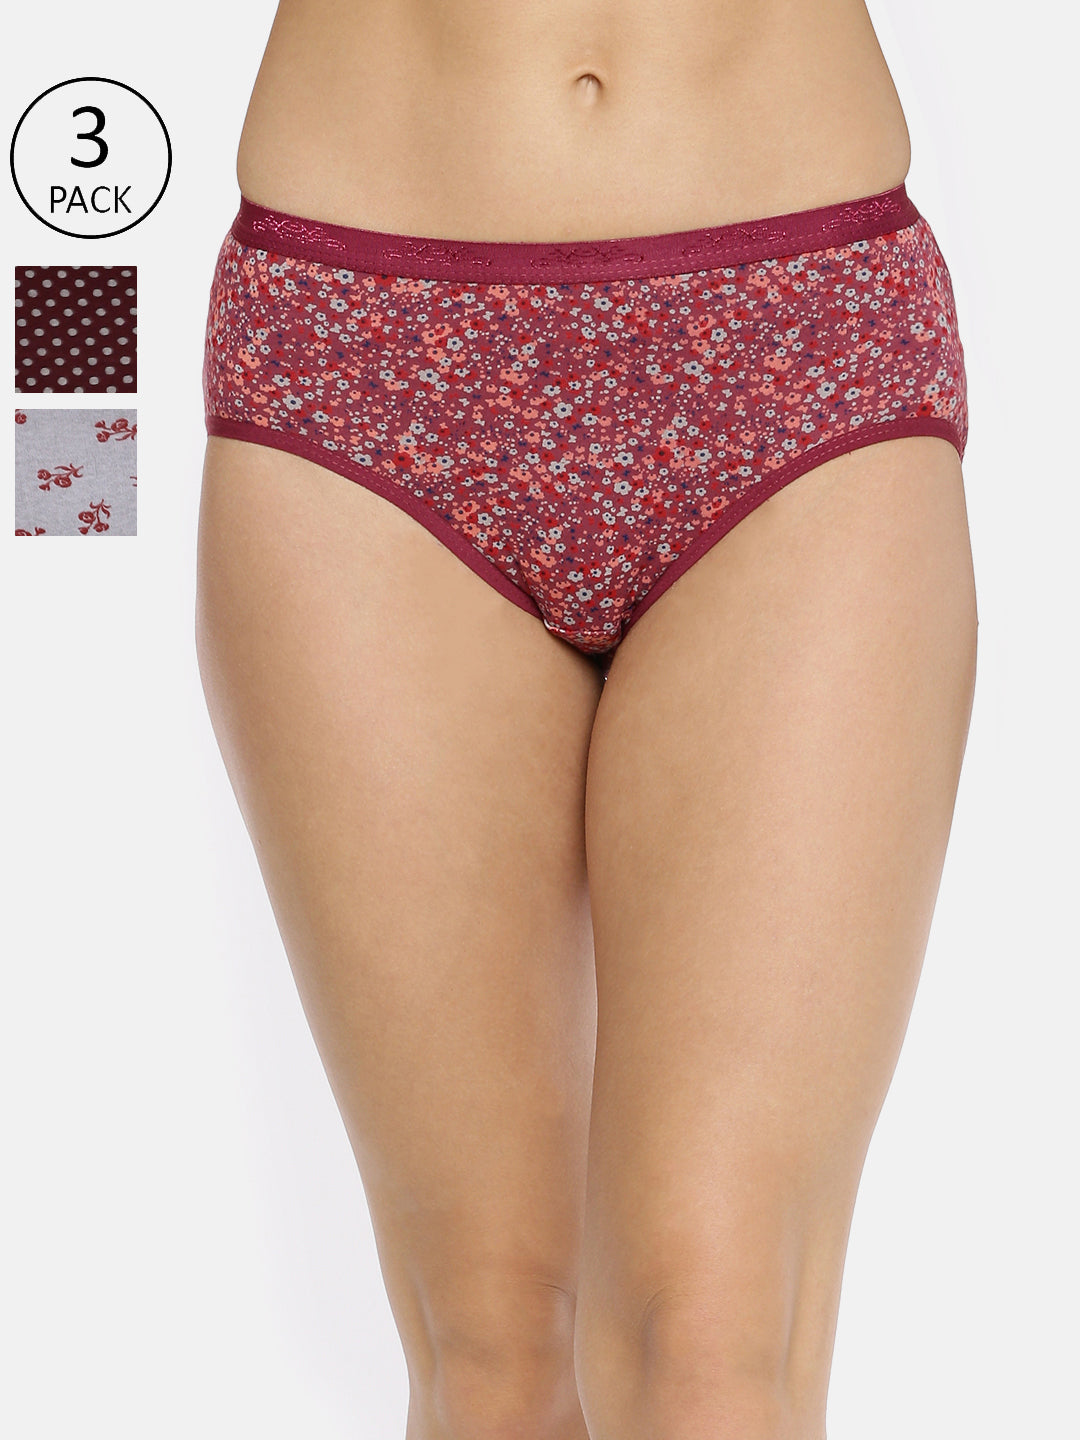 Hipster Panties - Buy Hipster Underwear for Women in India